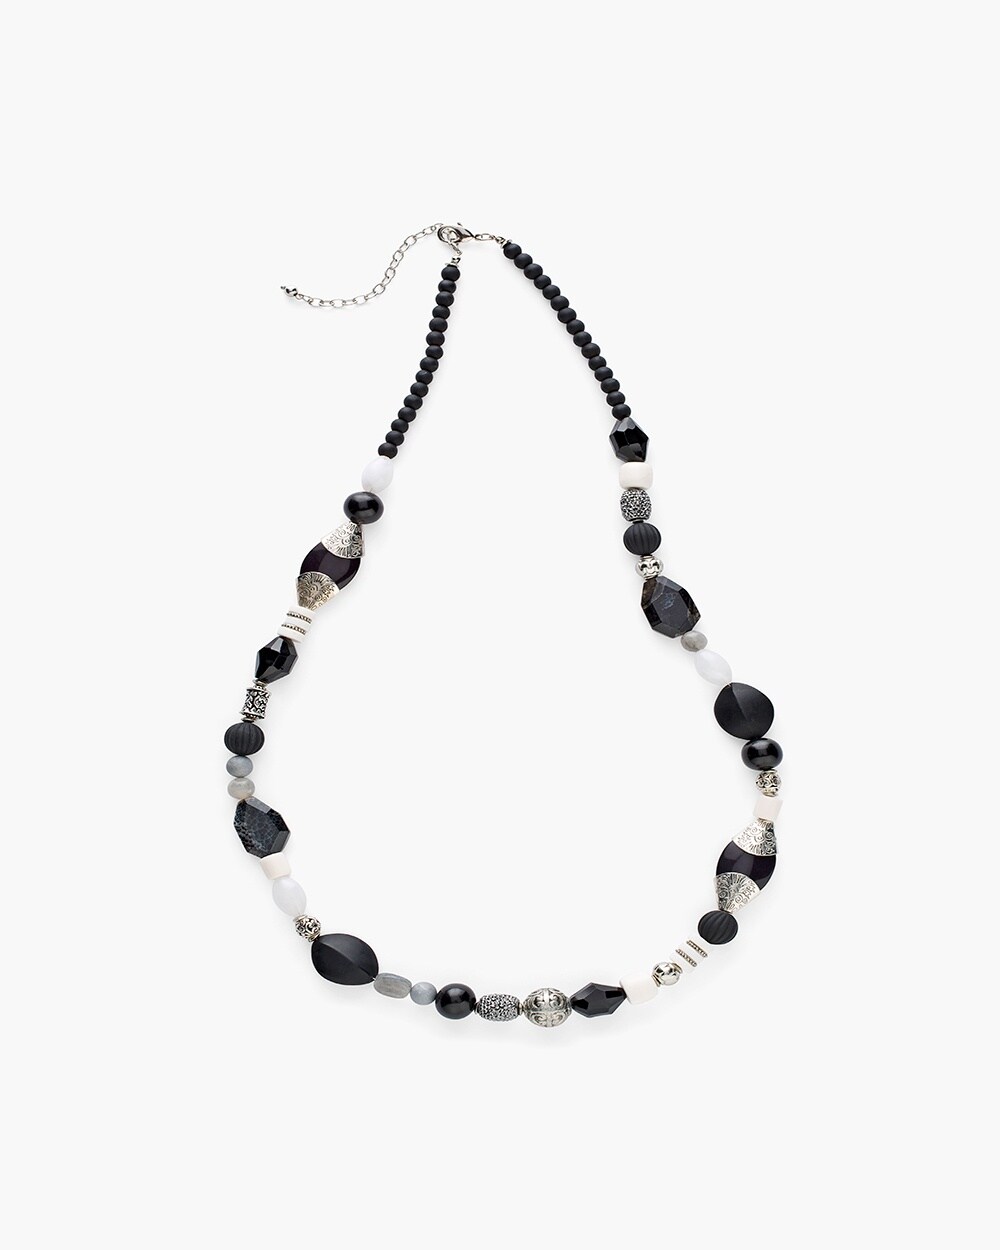 Long Black and White Single-Strand Necklace